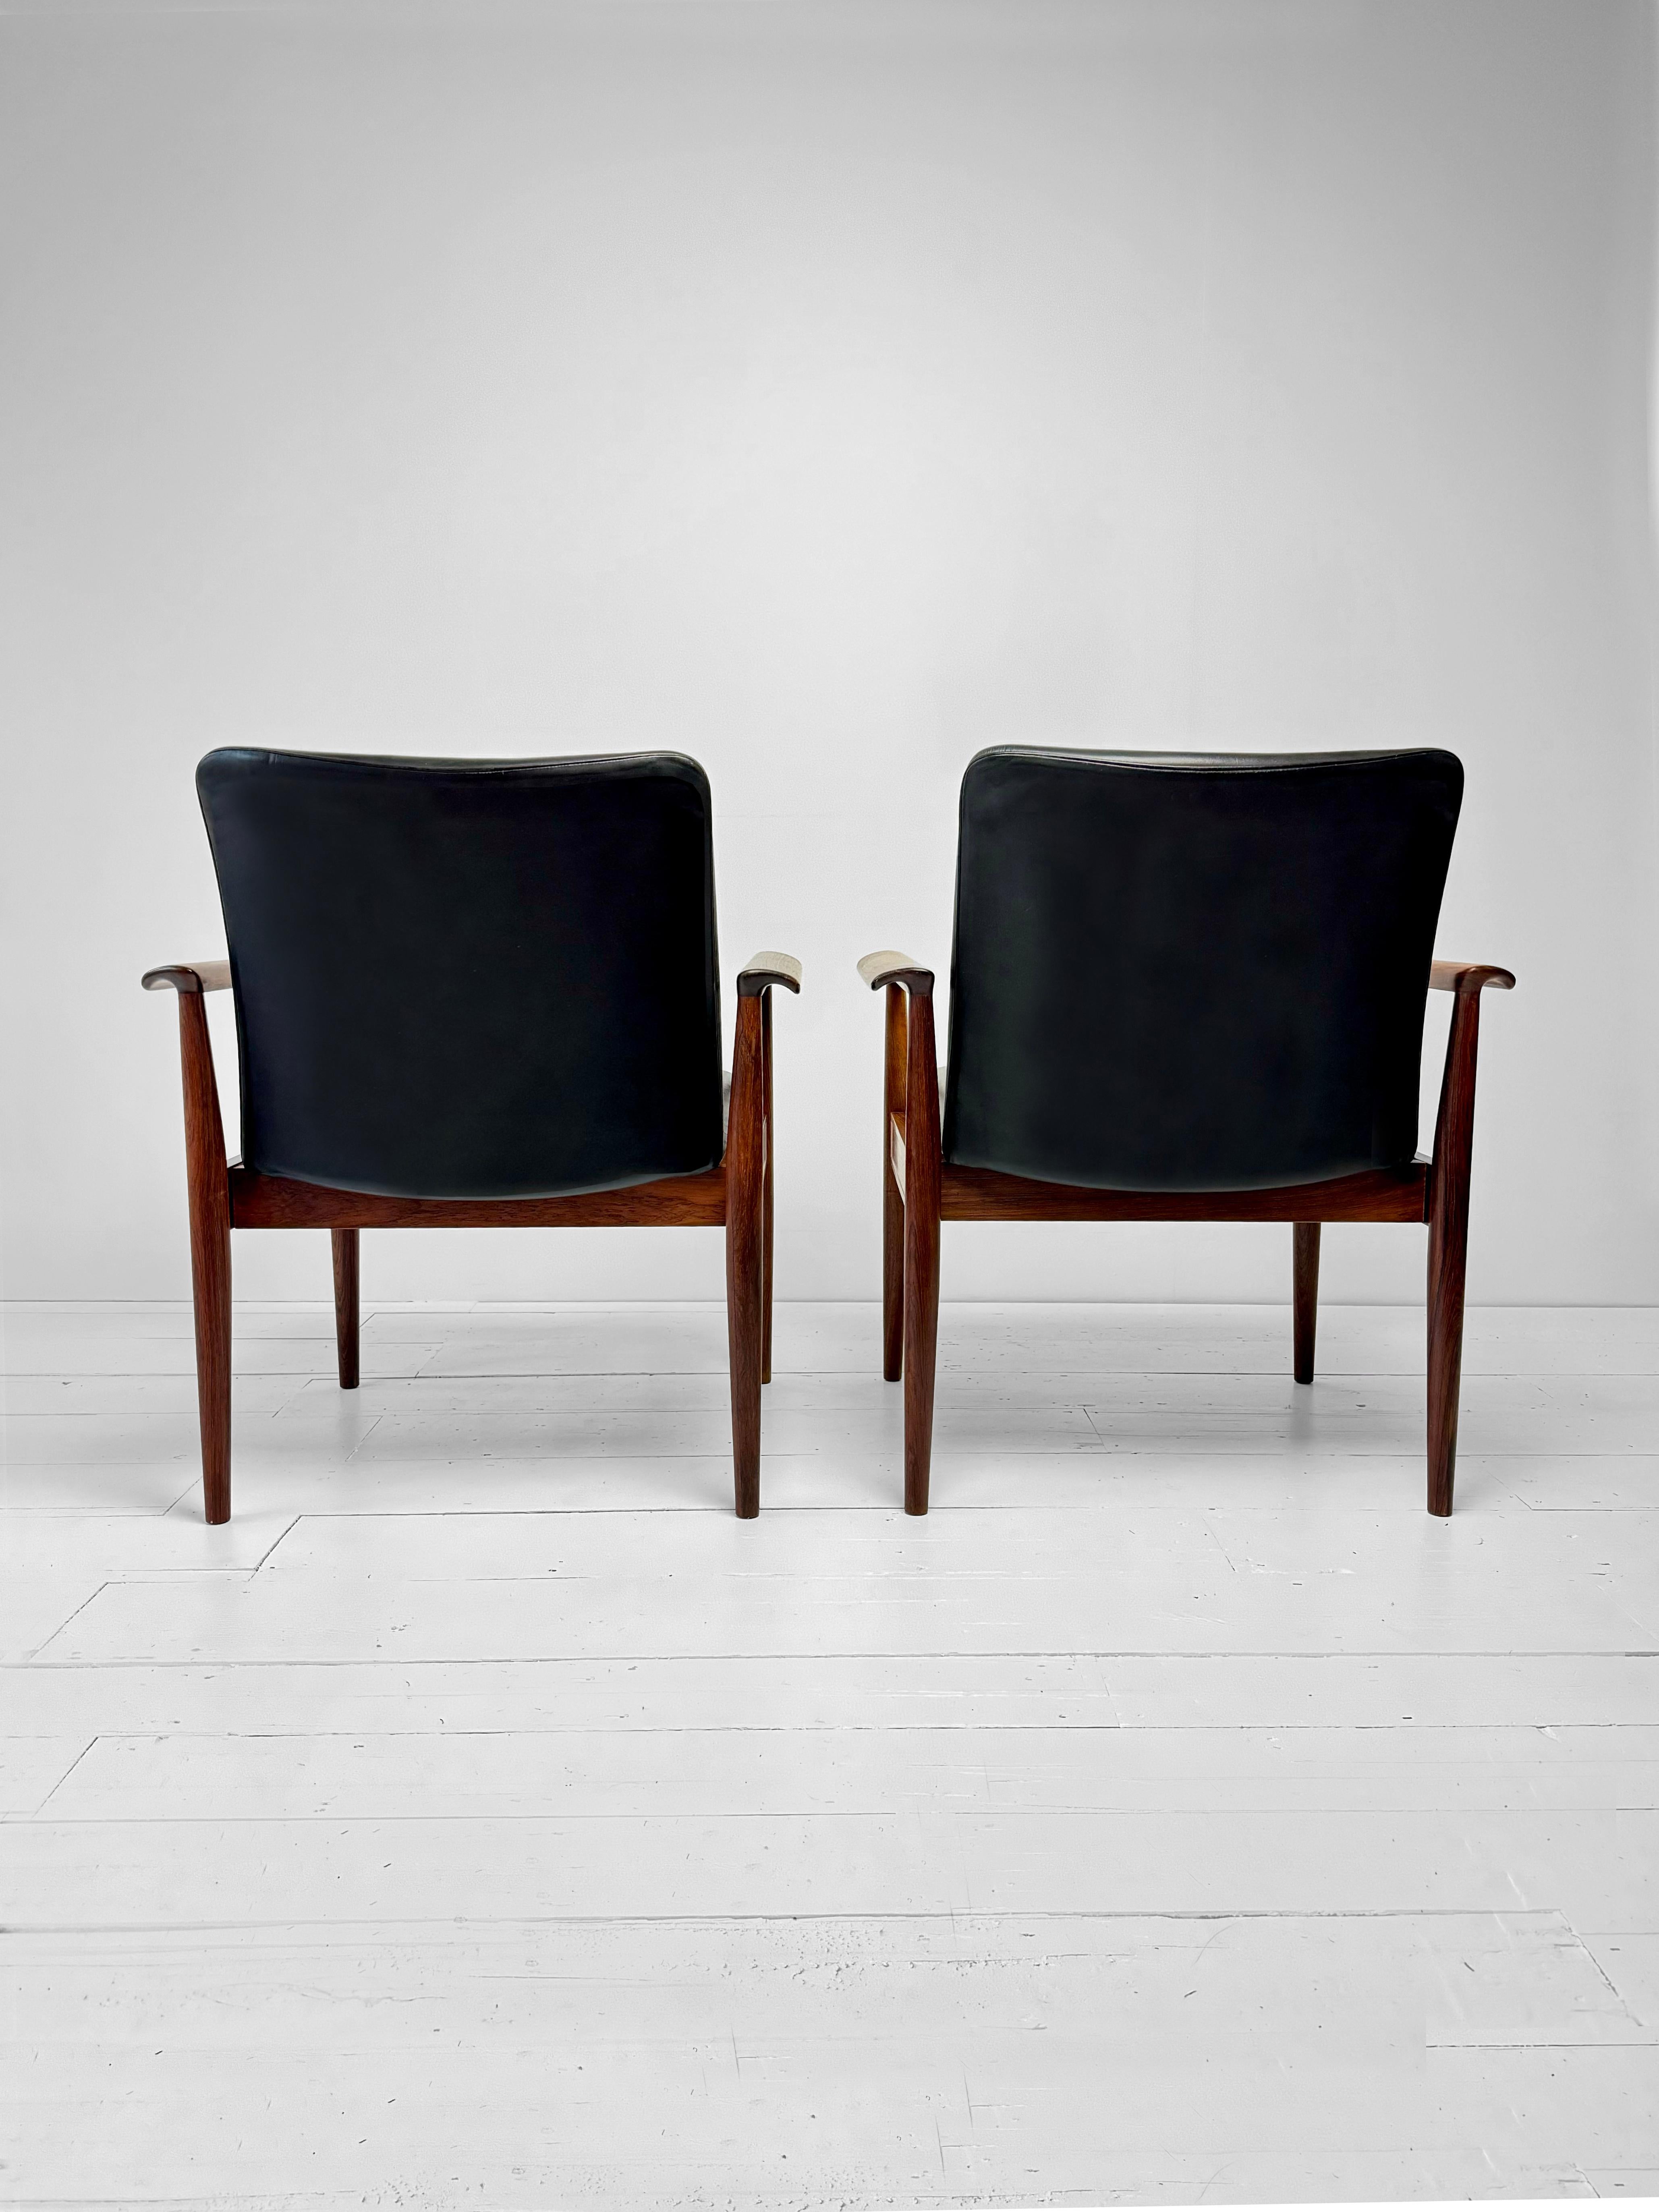 Polished Set of Diplomat Armchairs in Rosewood and Leather by Finn Juhl, Denmark c.1960's For Sale